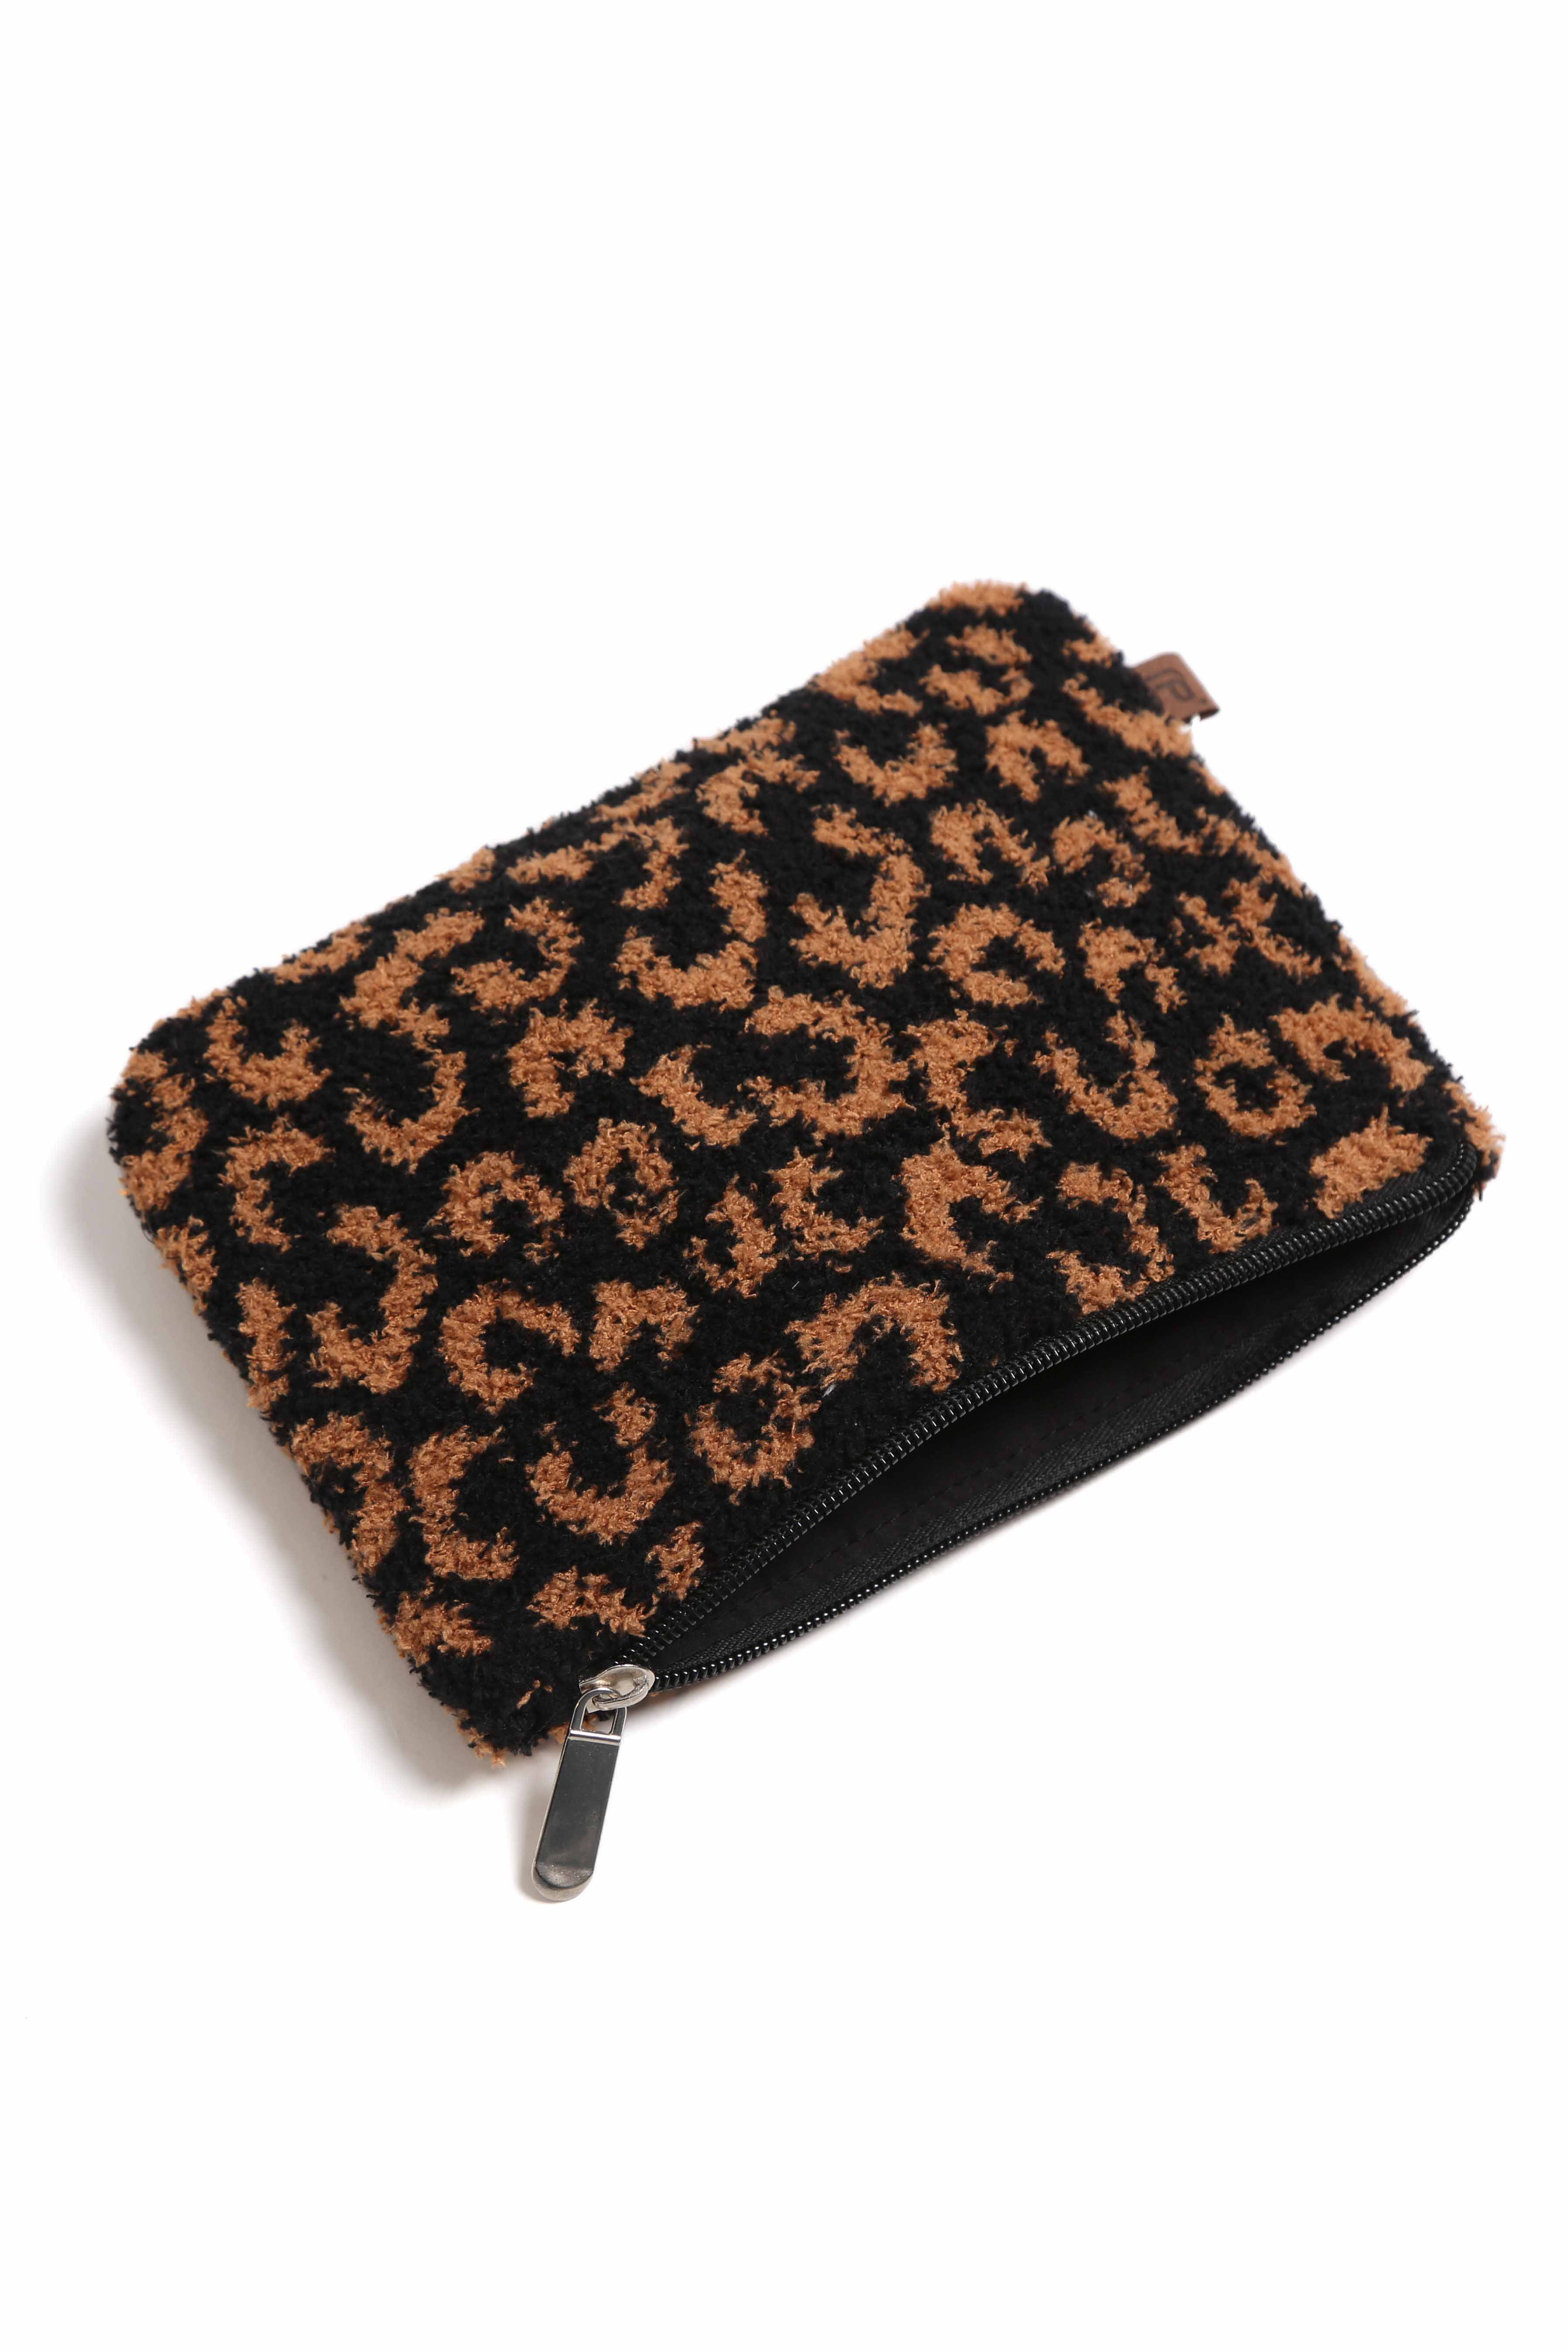 LEOPARD TRAVEL SMALL SIZE POUCH